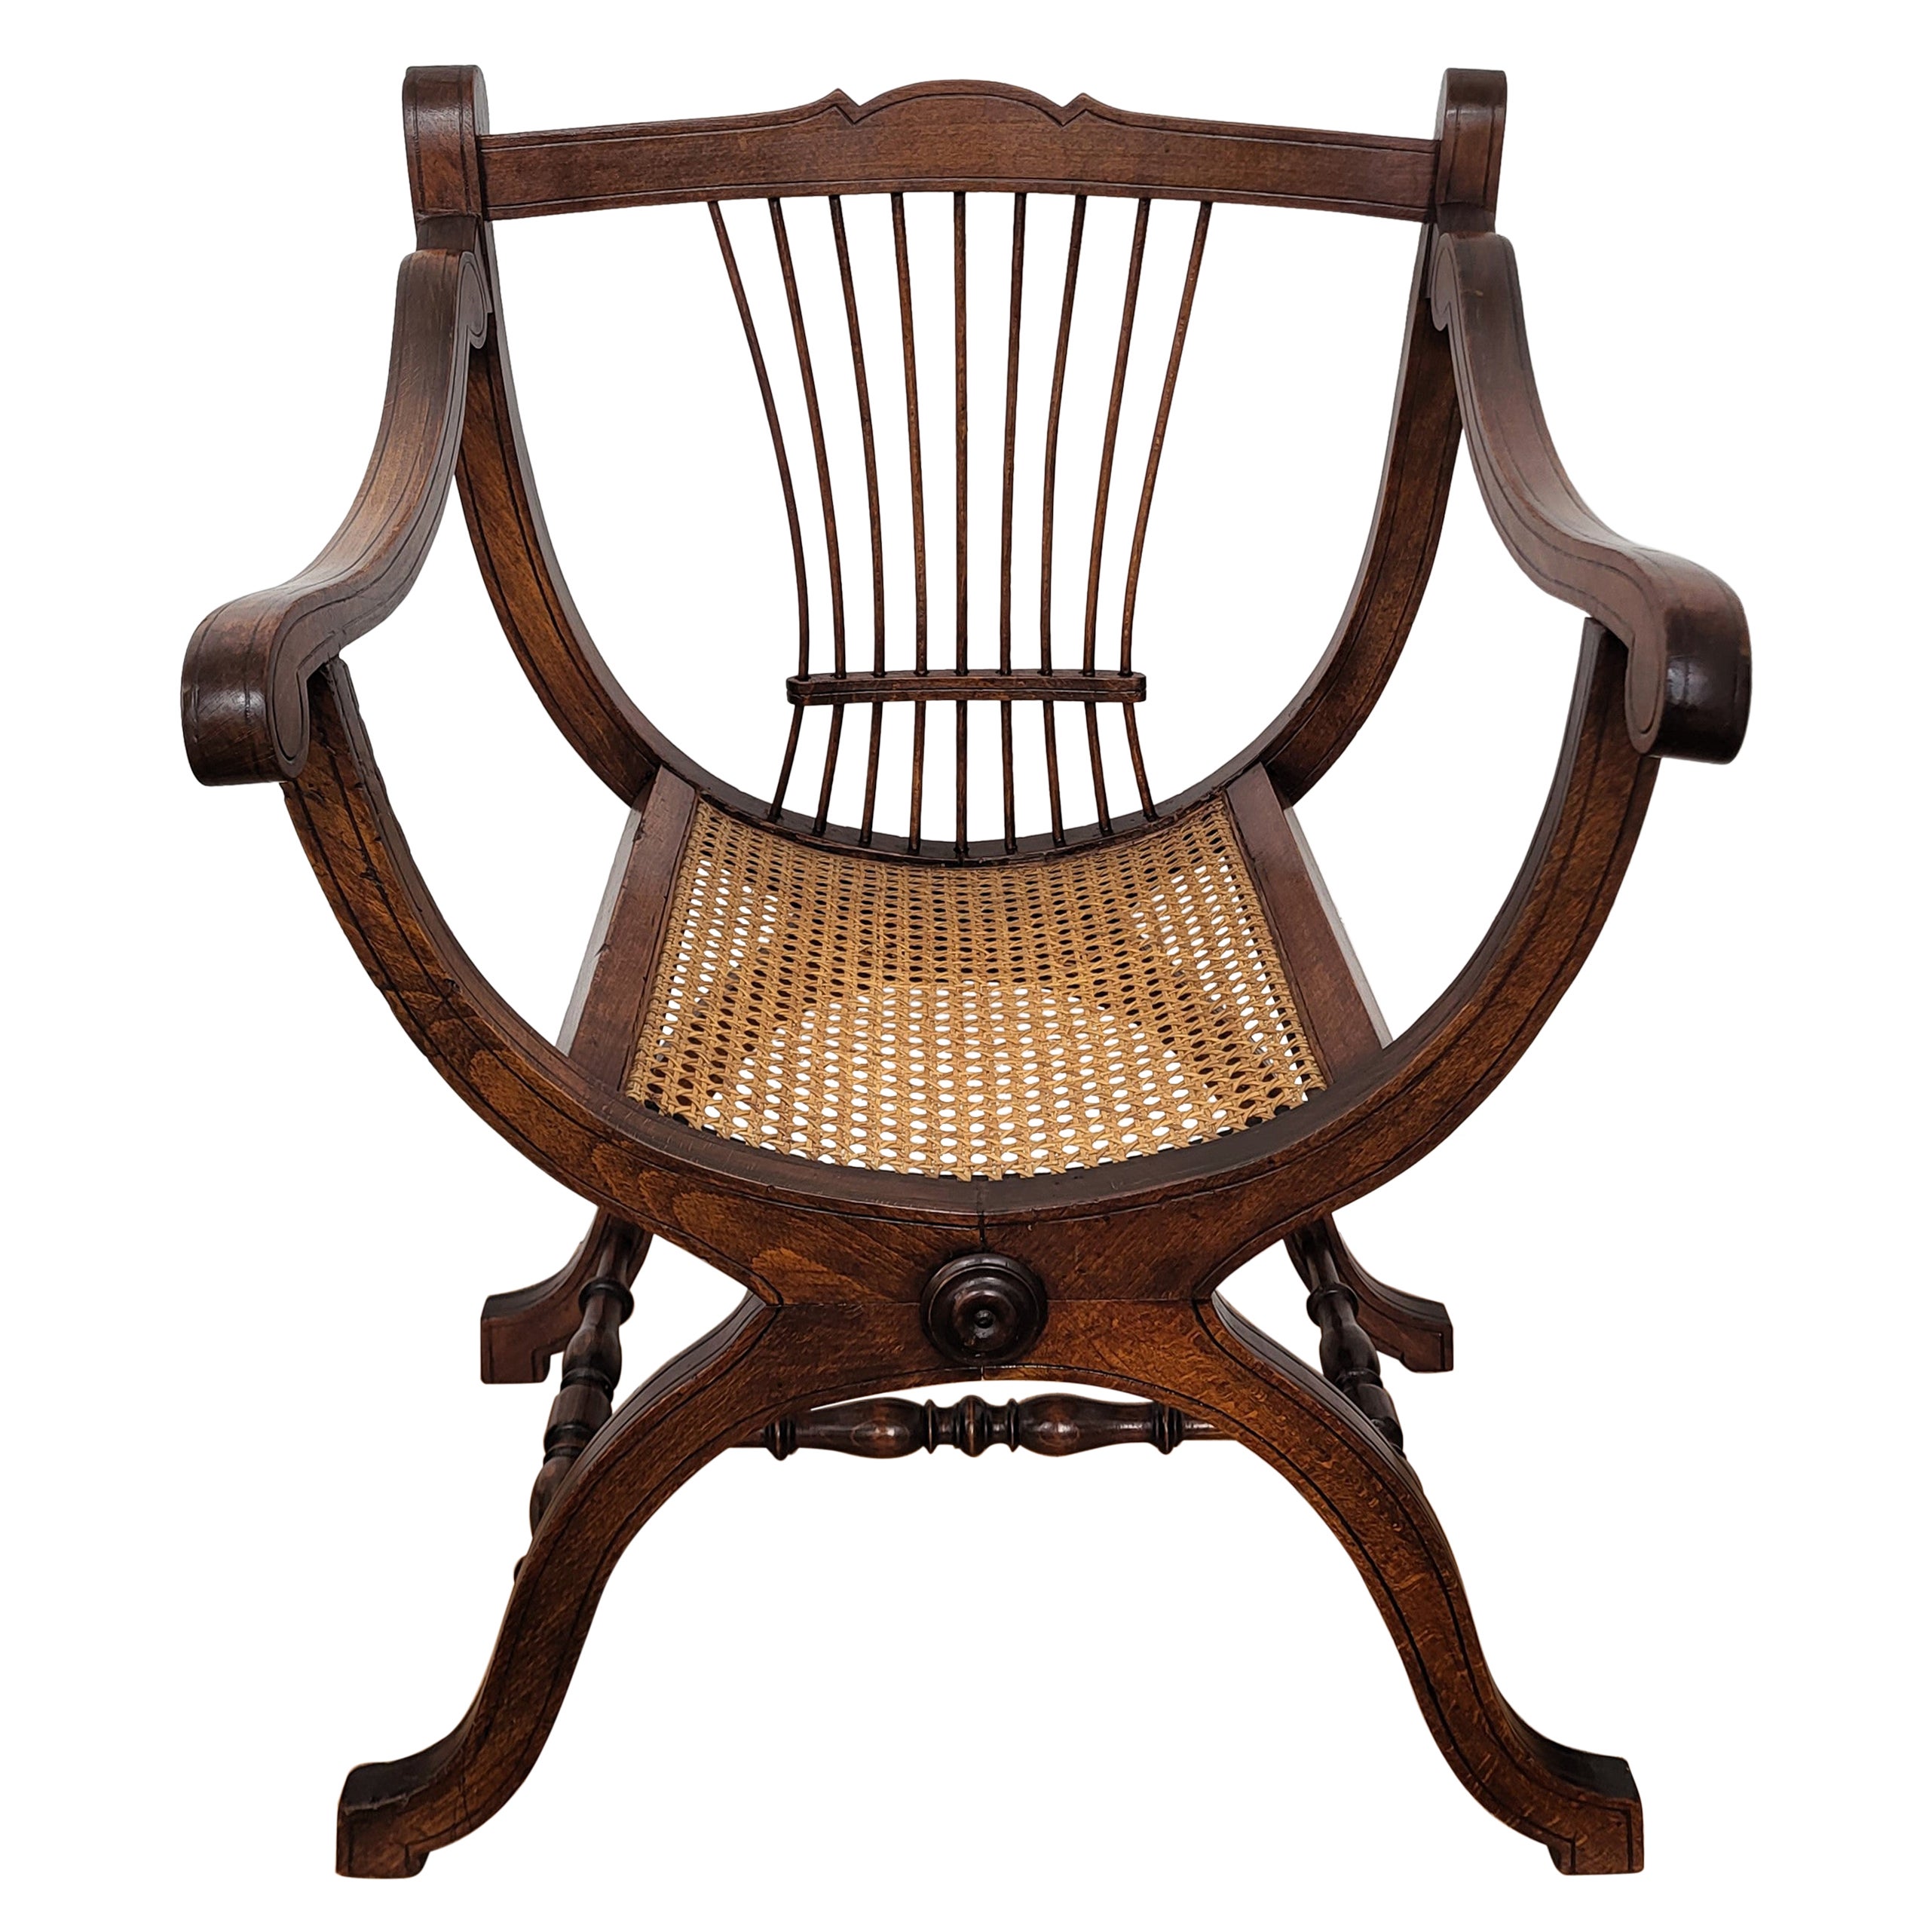 Italian Wooden Carved Caned Back Slatted Savonarola Design Arm Chairs For Sale